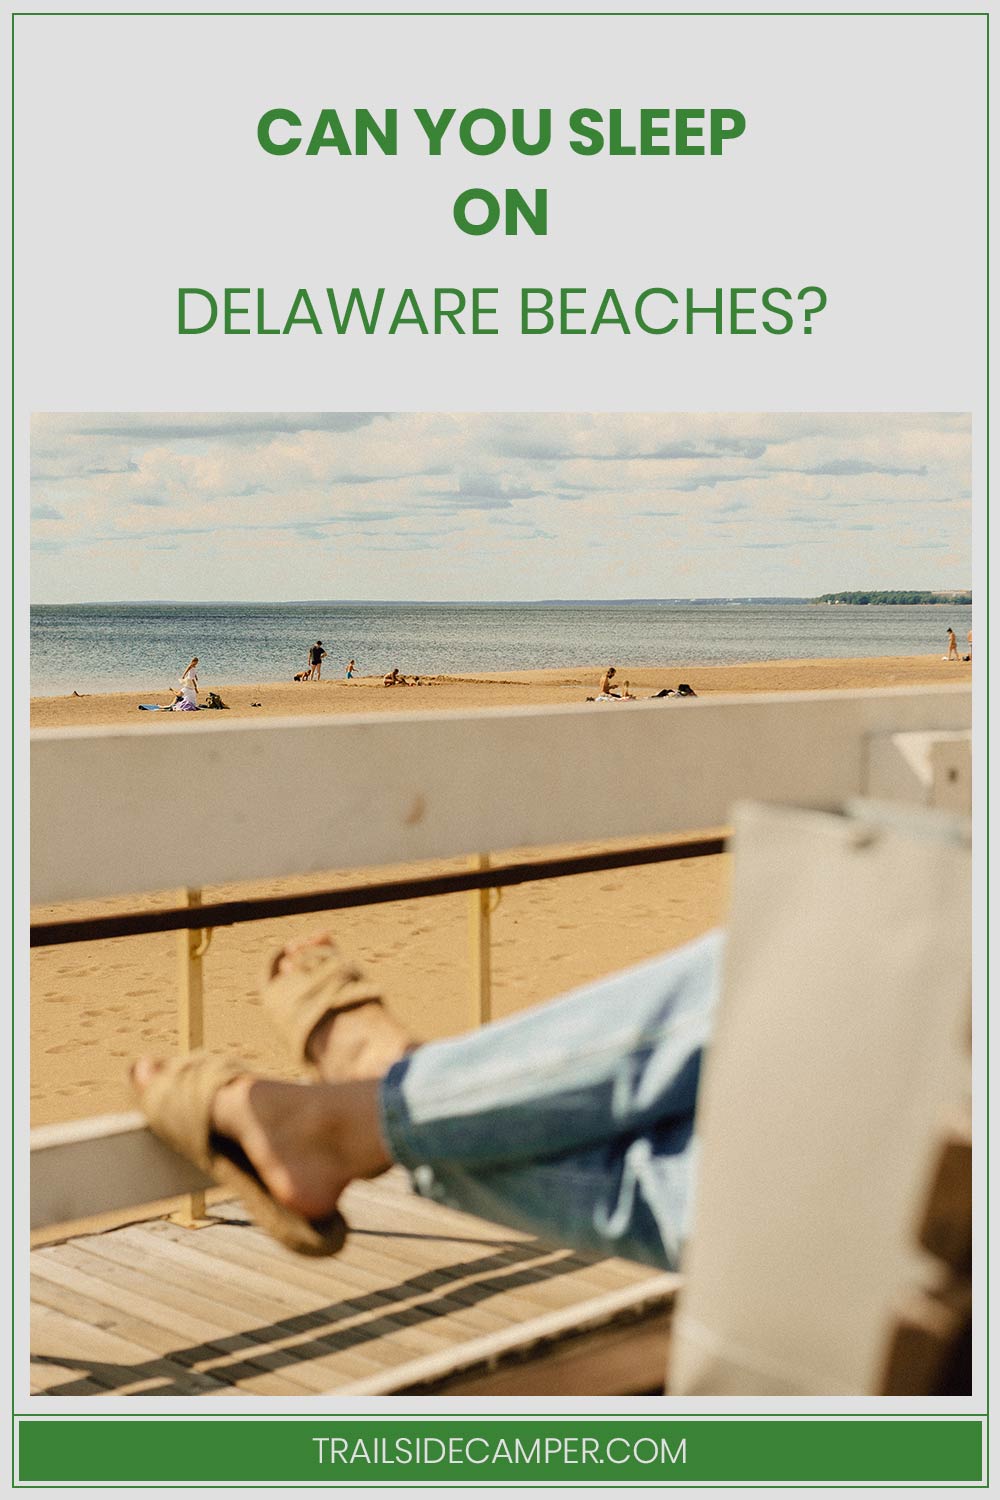 Can You Sleep On Delaware Beaches?